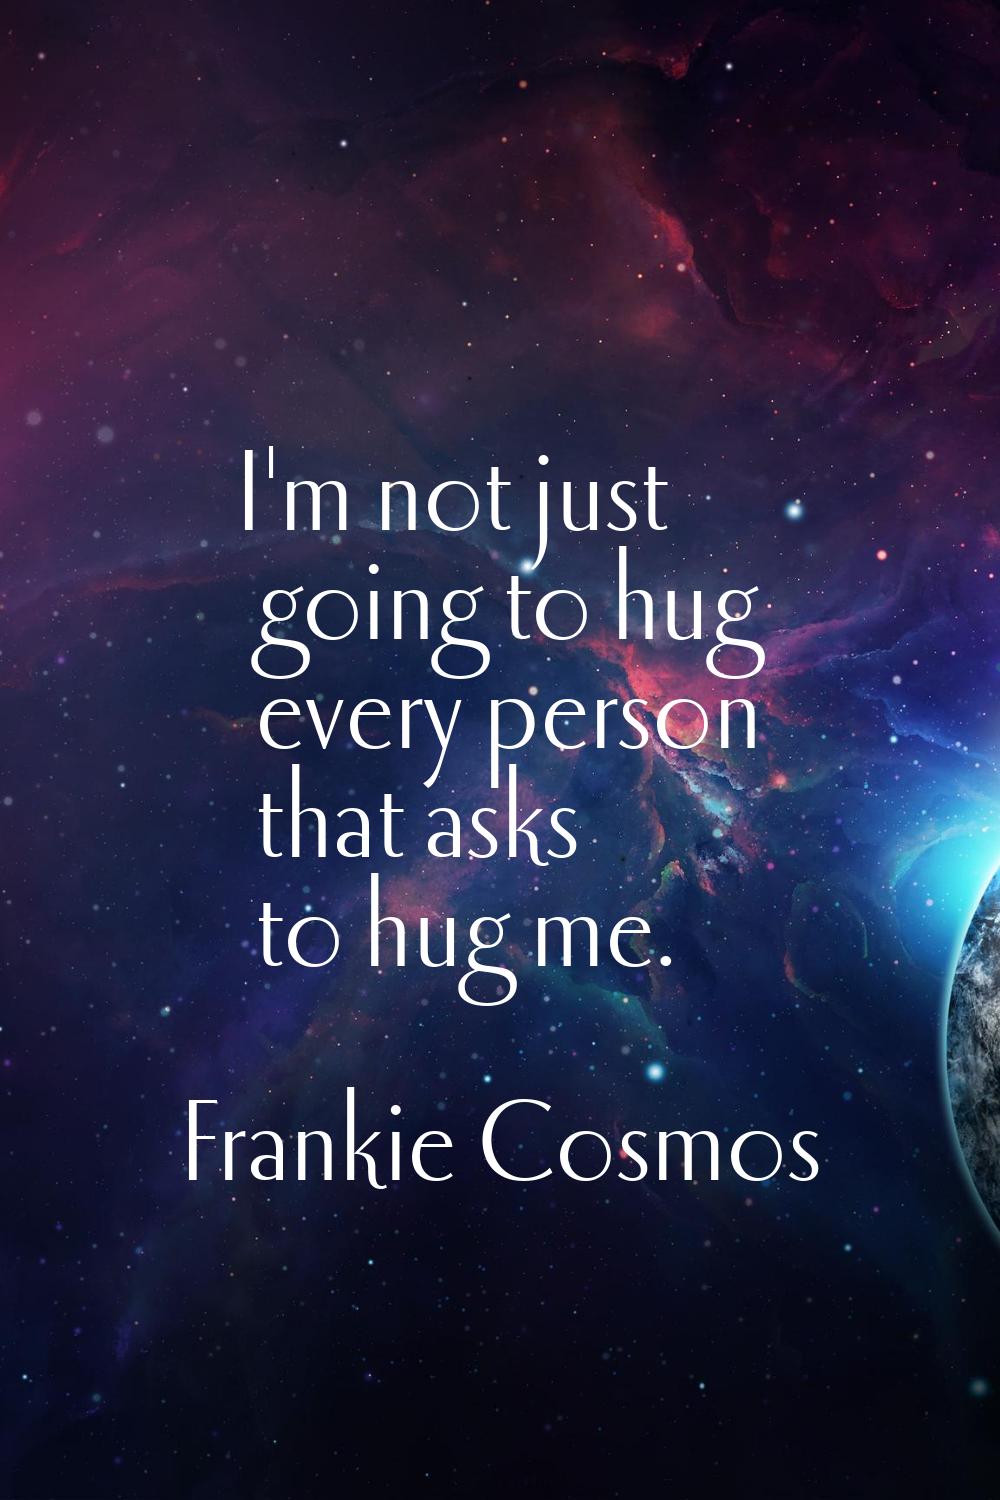 I'm not just going to hug every person that asks to hug me.